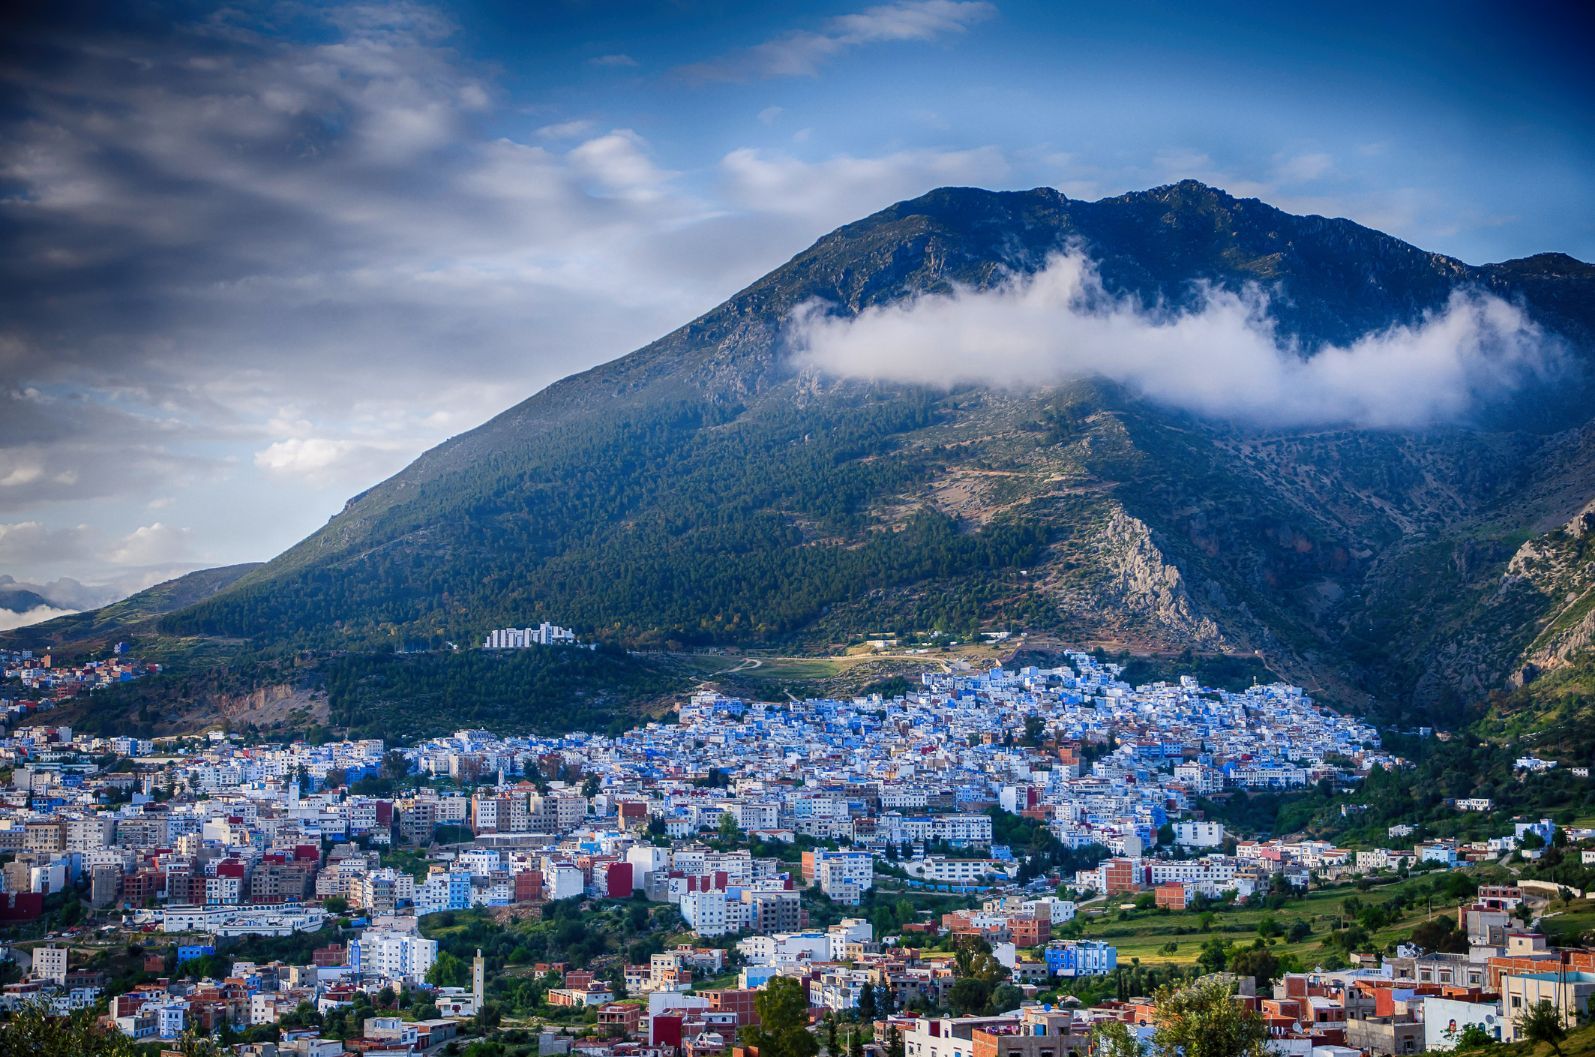 The now-sprawling city of Chefchaouen, with the medina at the foot of the Rif Mountains behind. Photo: Getty